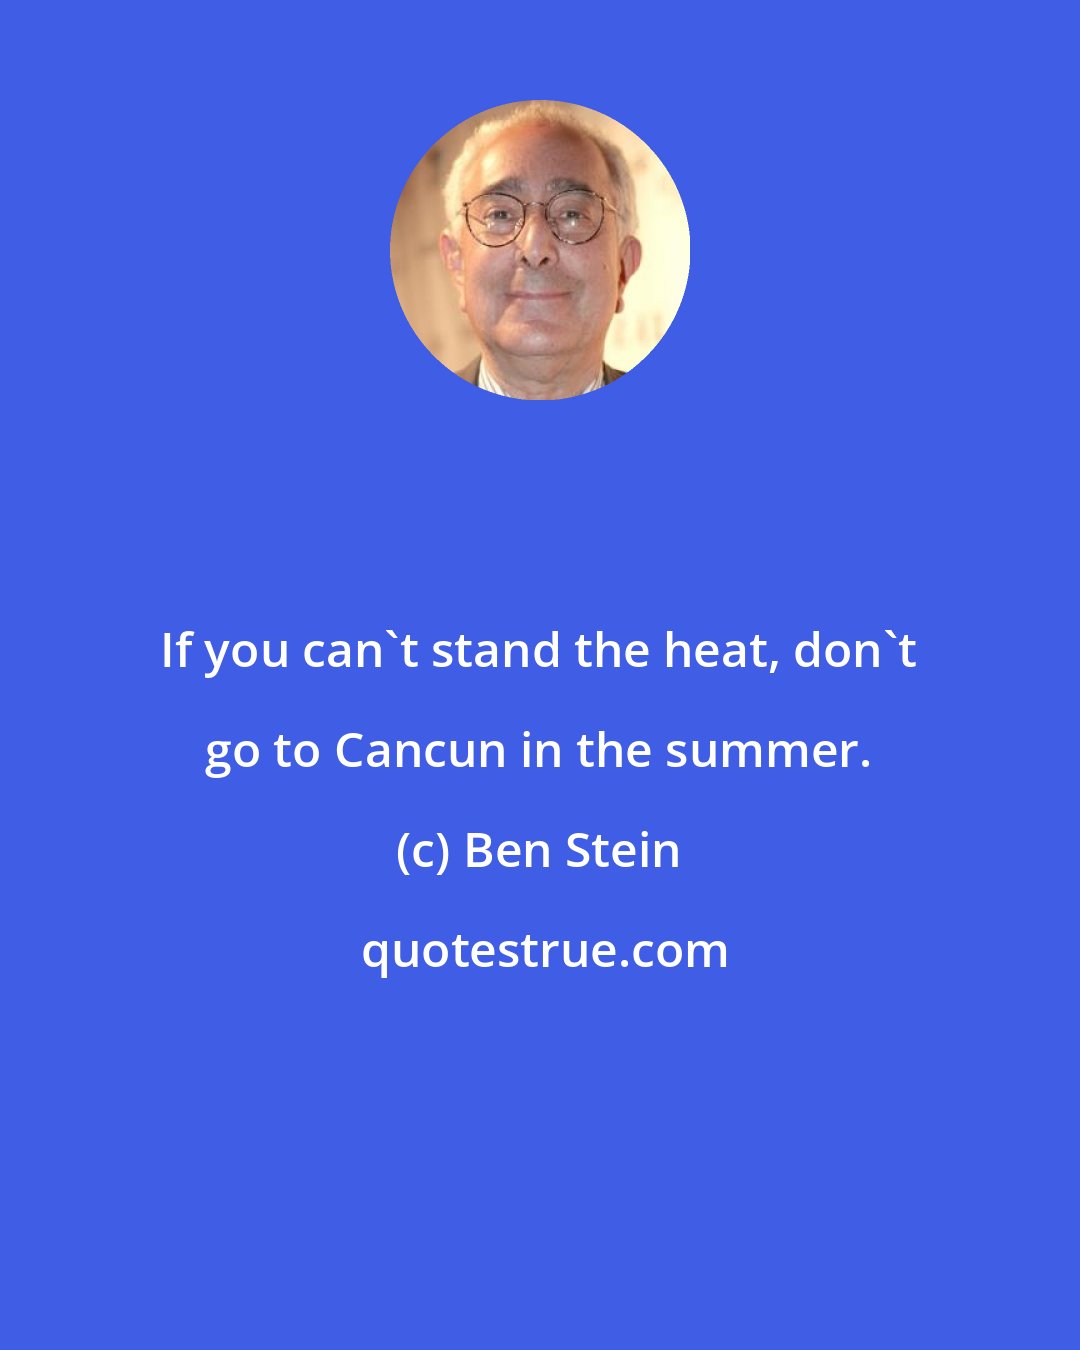 Ben Stein: If you can't stand the heat, don't go to Cancun in the summer.